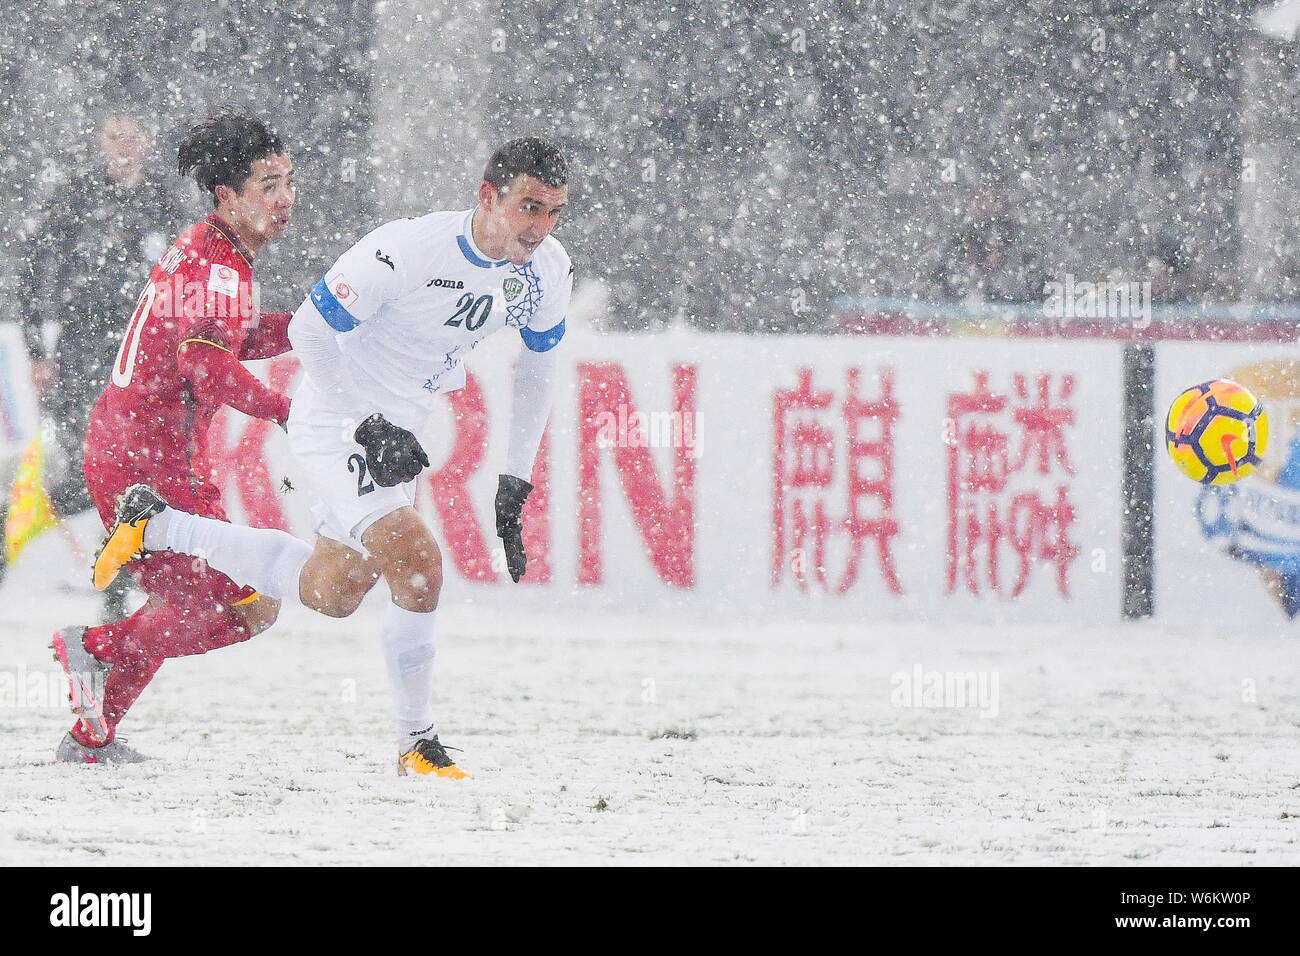 Dostonbek Tursunov Right Of Uzbekistan Kicks The Ball To Make A Pass Against Nguyen Cong Phuong Of Vietnam In Their Final Match To Fight For The Cha Stock Photo Alamy